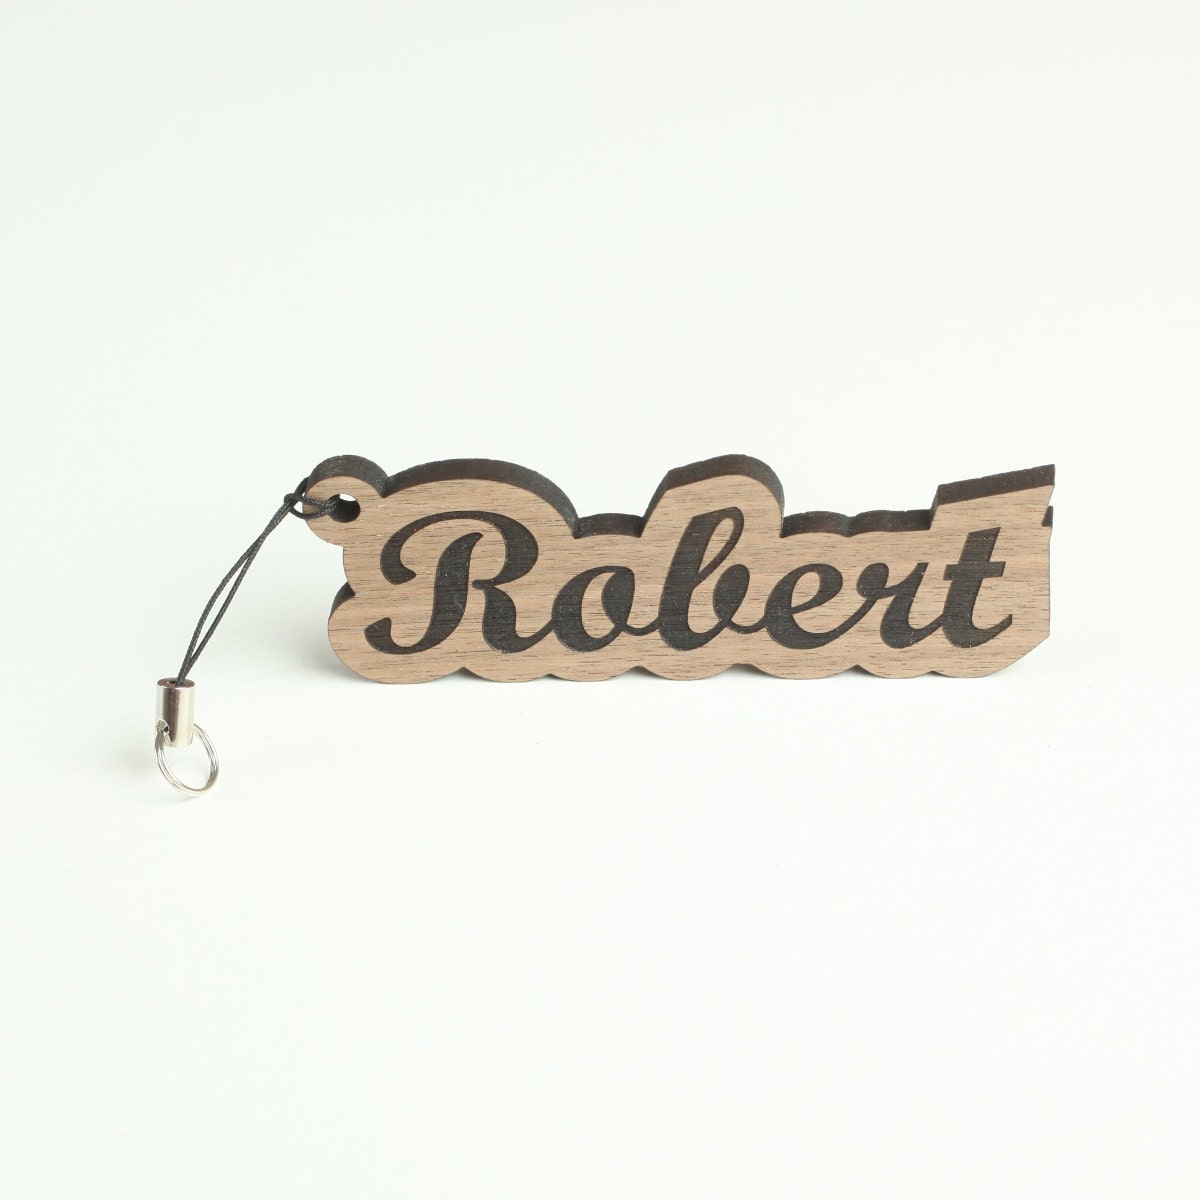 Wood Keychain Custom Wooden Key Chains Key Ring With Name